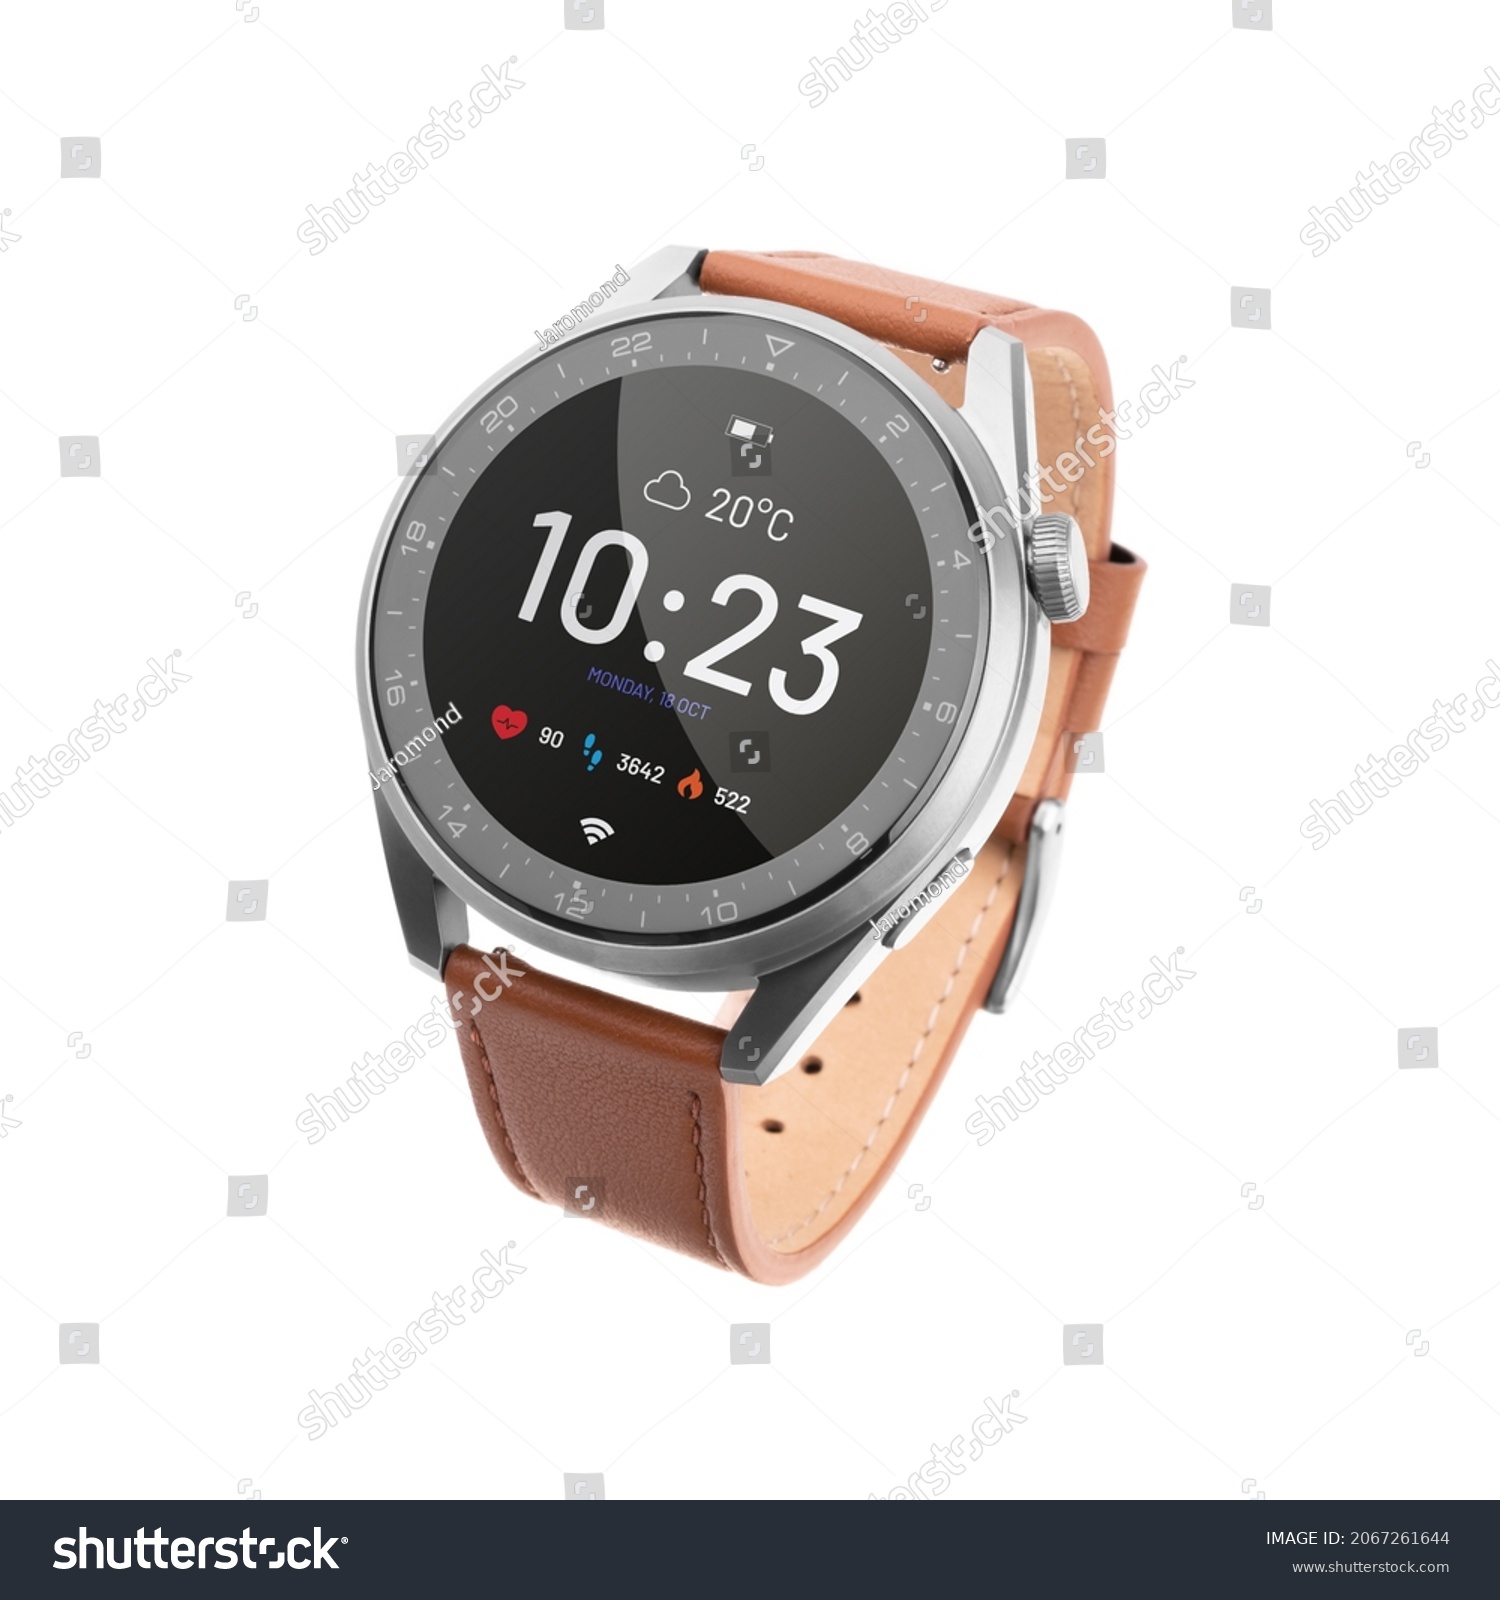 Smart watch with display on. Fashion watch with leather strap. #2067261644